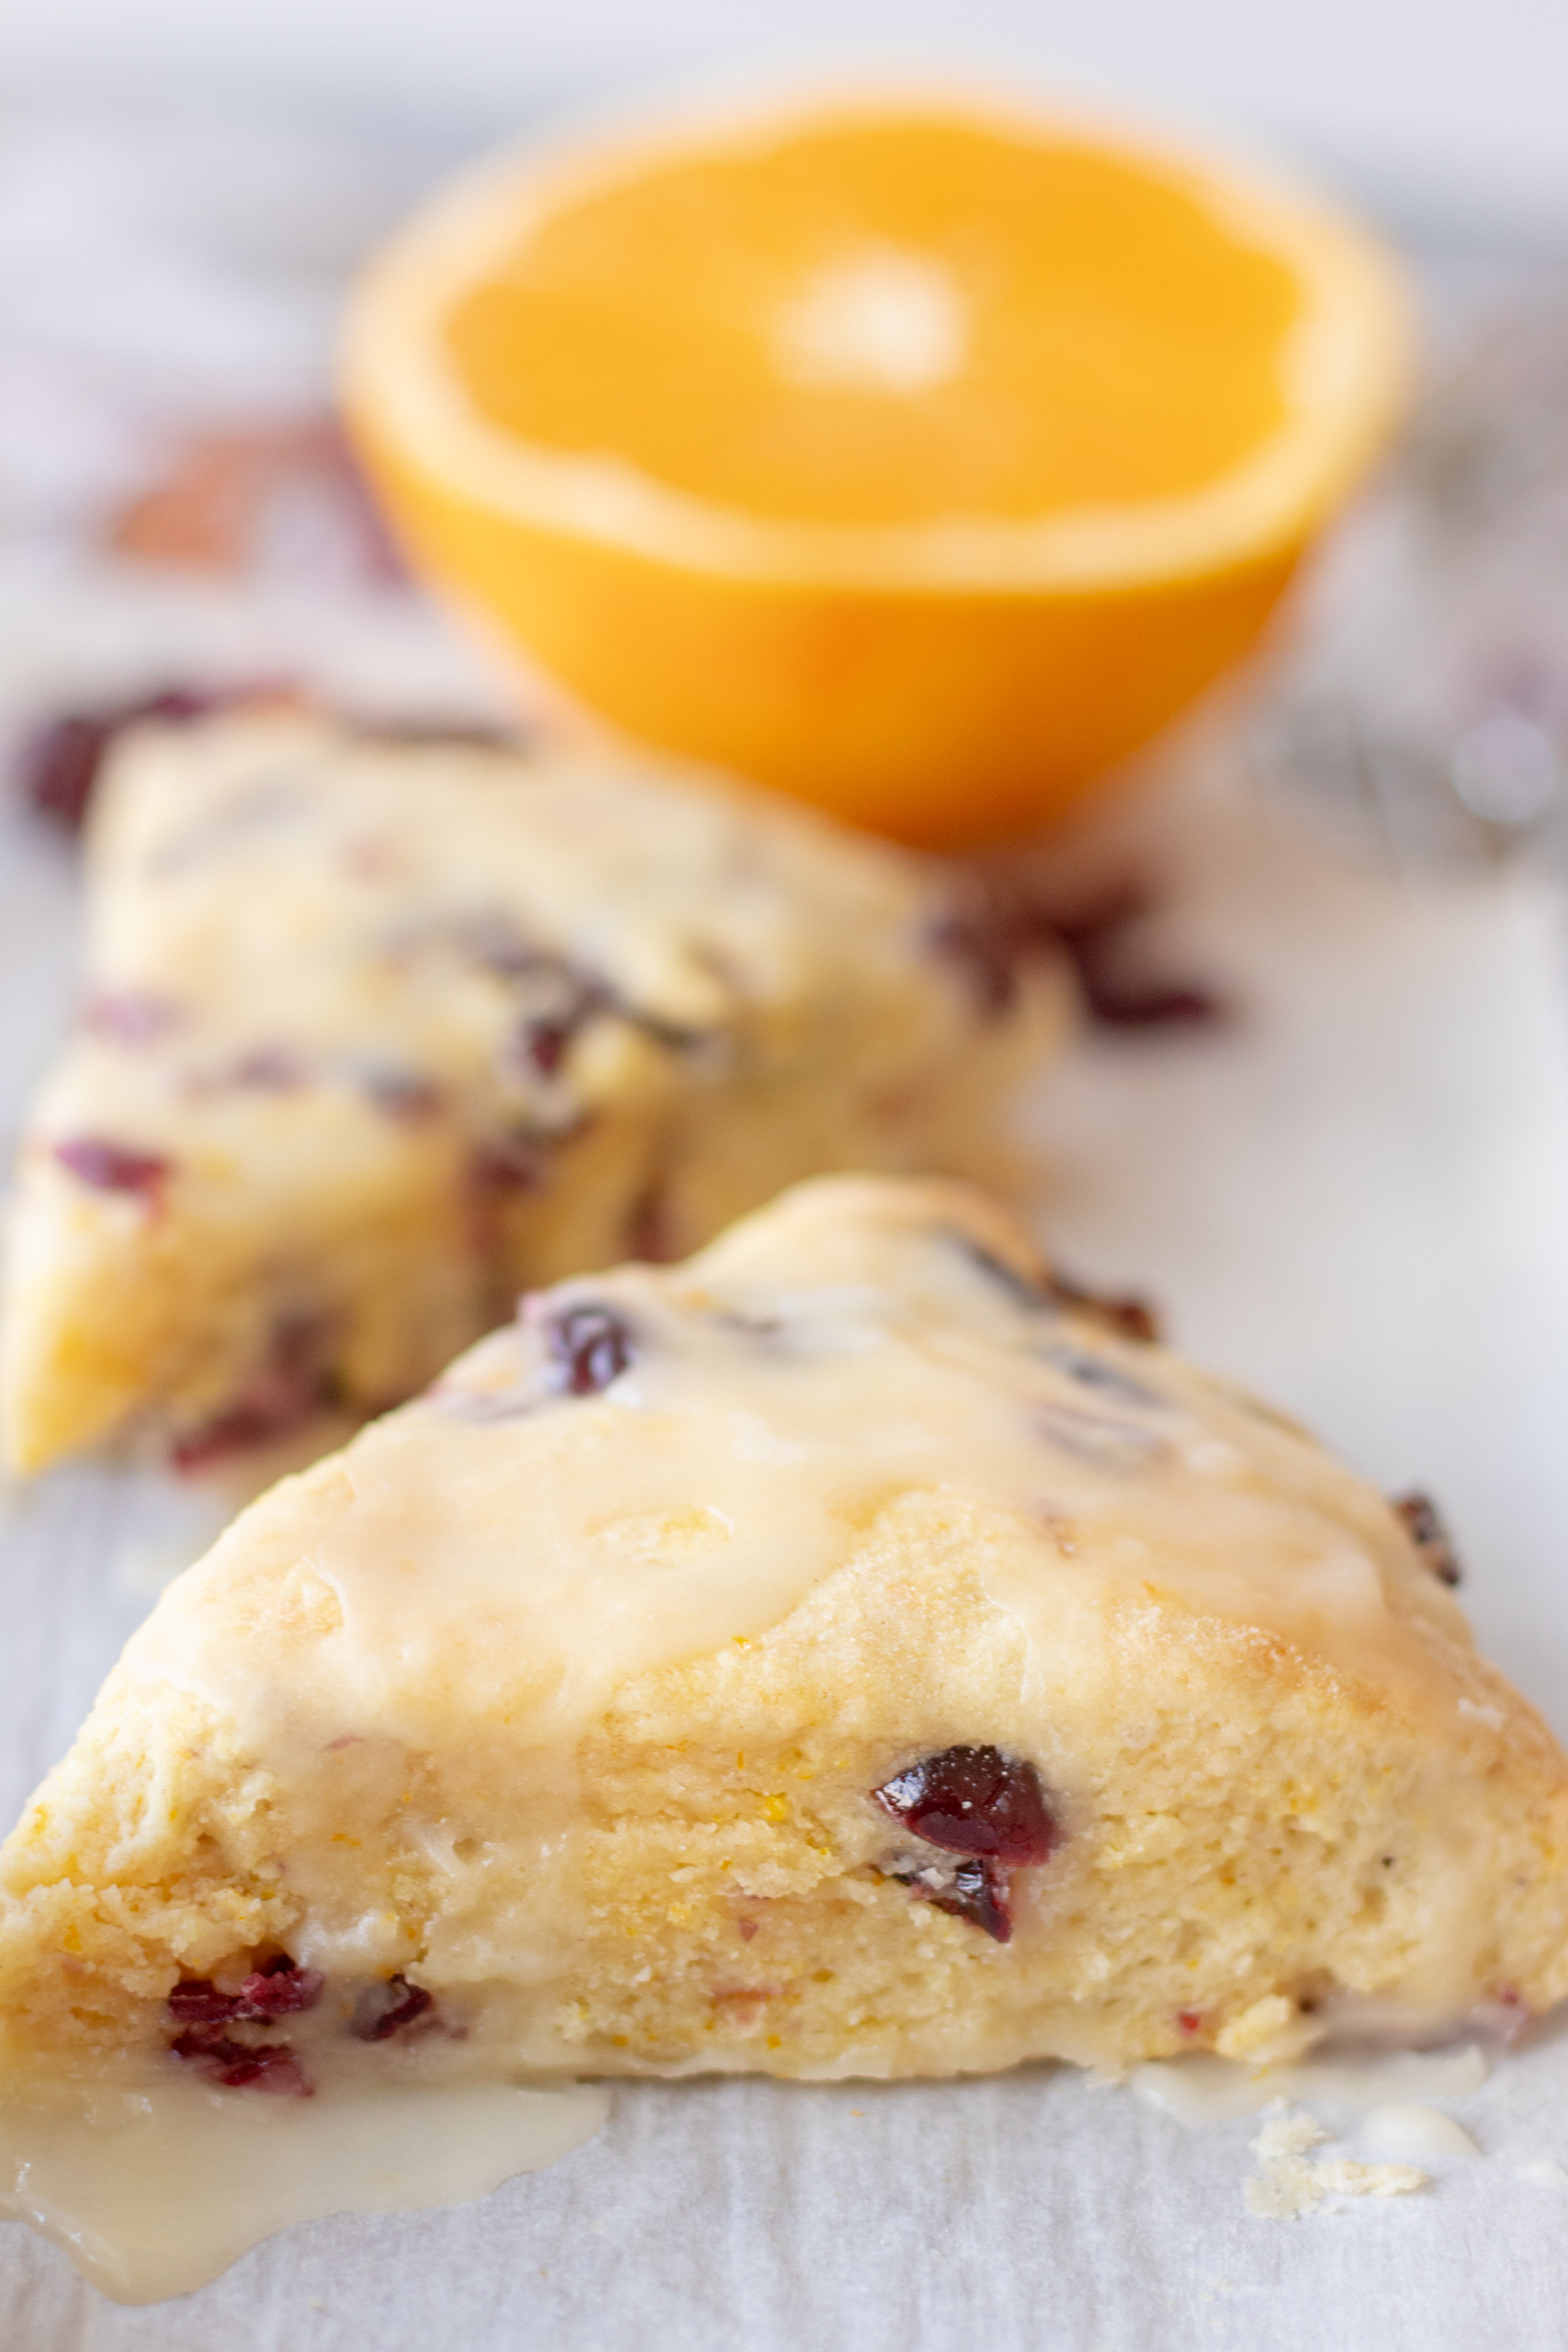 These Cranberry Orange Scones are buttery, crumbly, and light. They are full of flavor and will melt in your mouth! The tartness of the cranberries balances out the sweet orange, and they're a perfect addition for your tea or breakfast! Don’t forget the sweet orange glaze! via @foodhussy